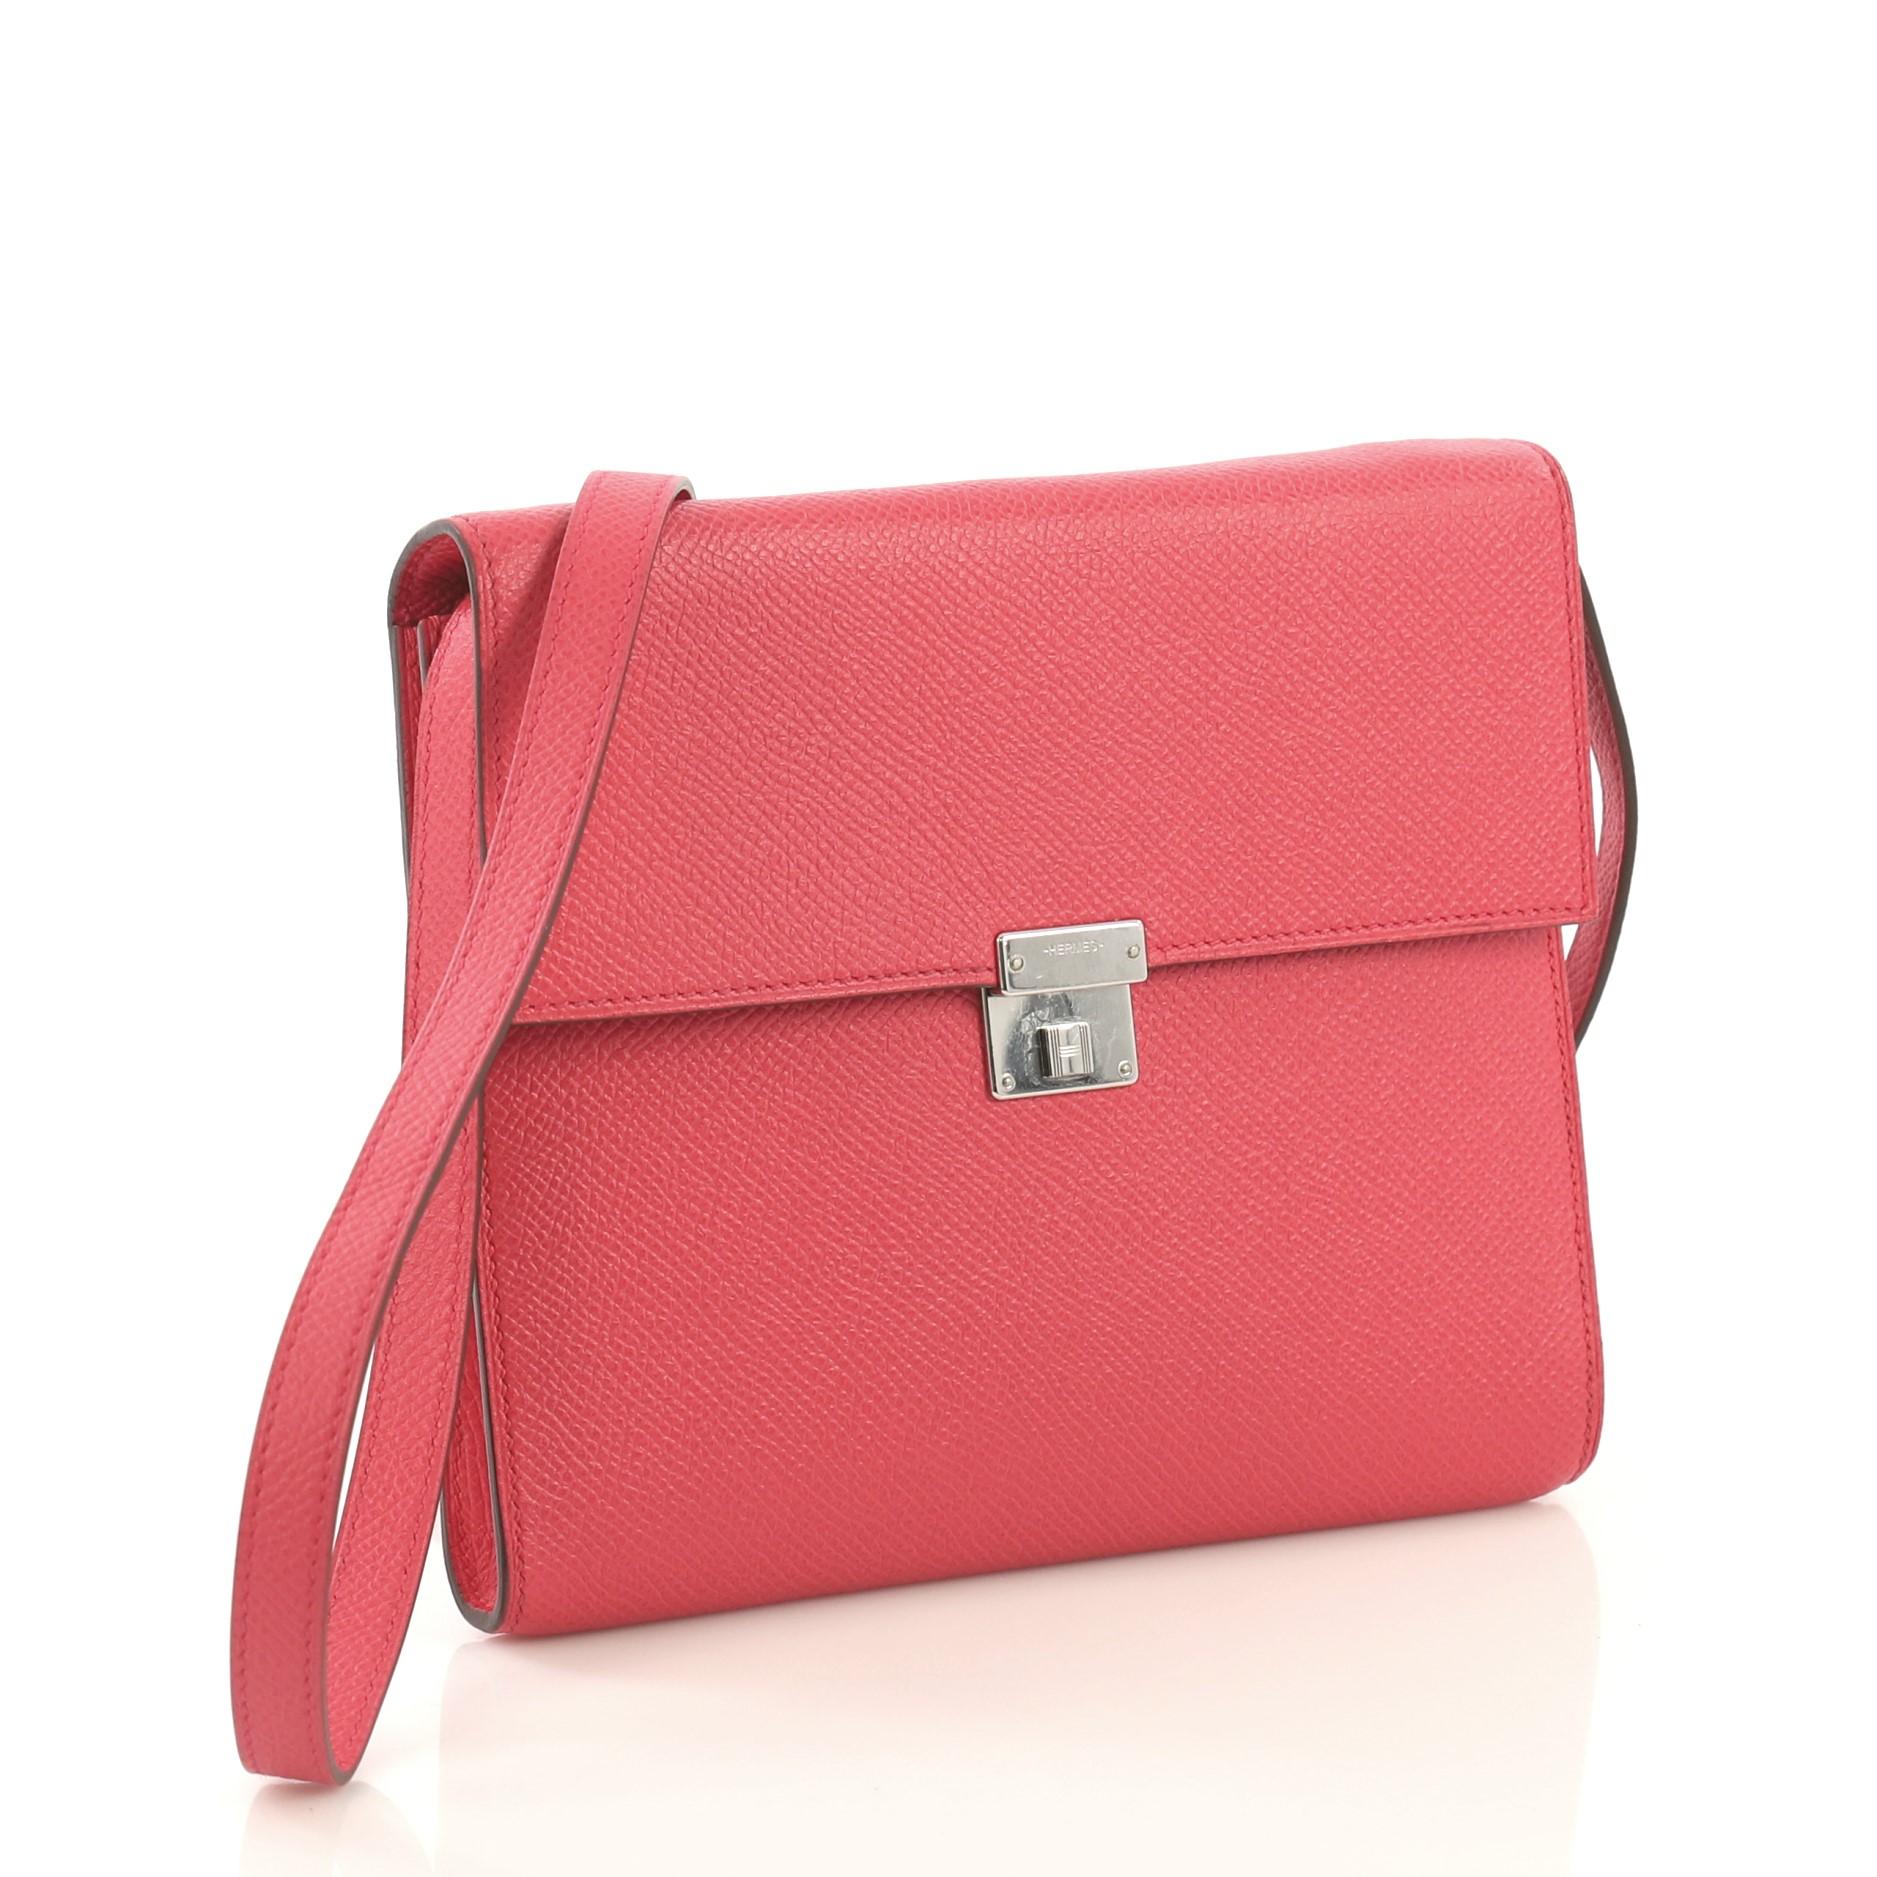 This Hermes Clic Wallet on Strap Epsom 16, crafted in Rose Extreme pink Epsom leather, features long leather strap, frontal flap and palladium hardware. It clasp closure opens to a Rose Extreme pink Epsom leather interior with multiple card slots